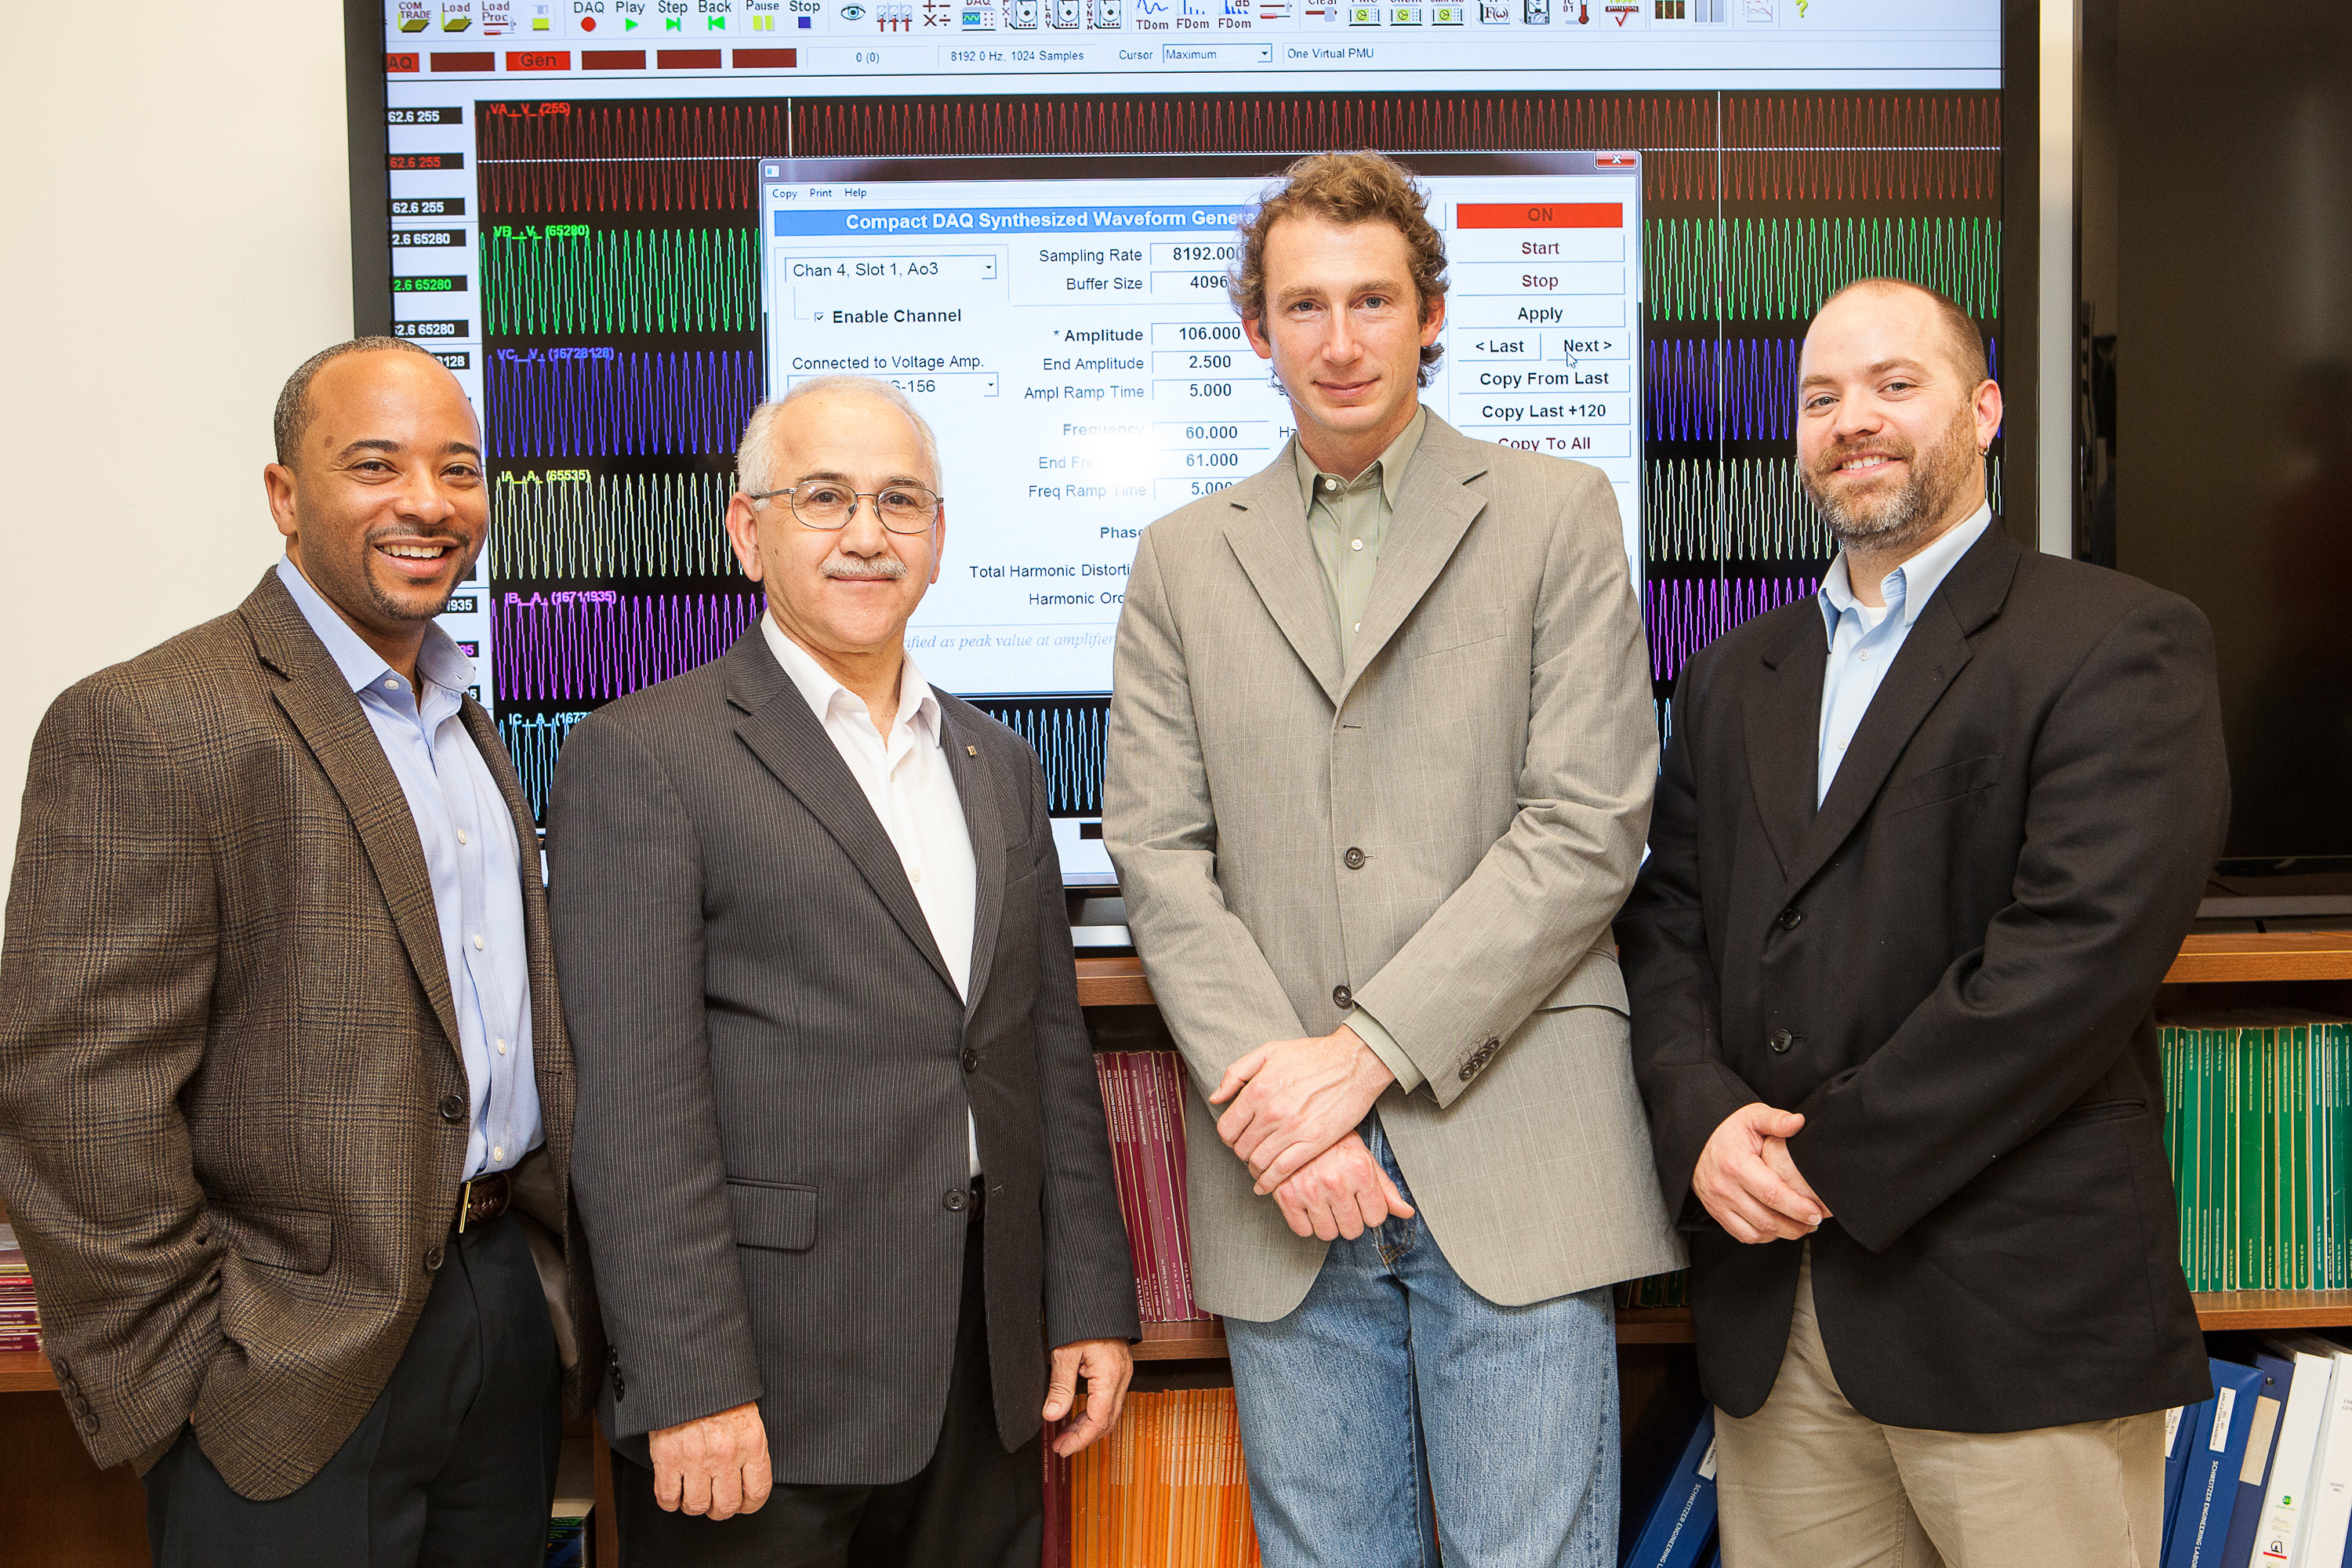 The Department of Energy has awarded Georgia Tech $1.7 million to help detect cyber attacks on our nation’s utility companies. From left are School of Electrical and Computer Engineering Associate Professor Raheem Beyah, Georgia Power Distinguished Professor A. P. “Sakis” Meliopoulos, Georgia Tech Research Institute Research Scientist Seth Walters and National Electric Energy Research, Testing and Applications Center Research Engineer Carson Day. Not pictured is Associate Director for Electricity at t